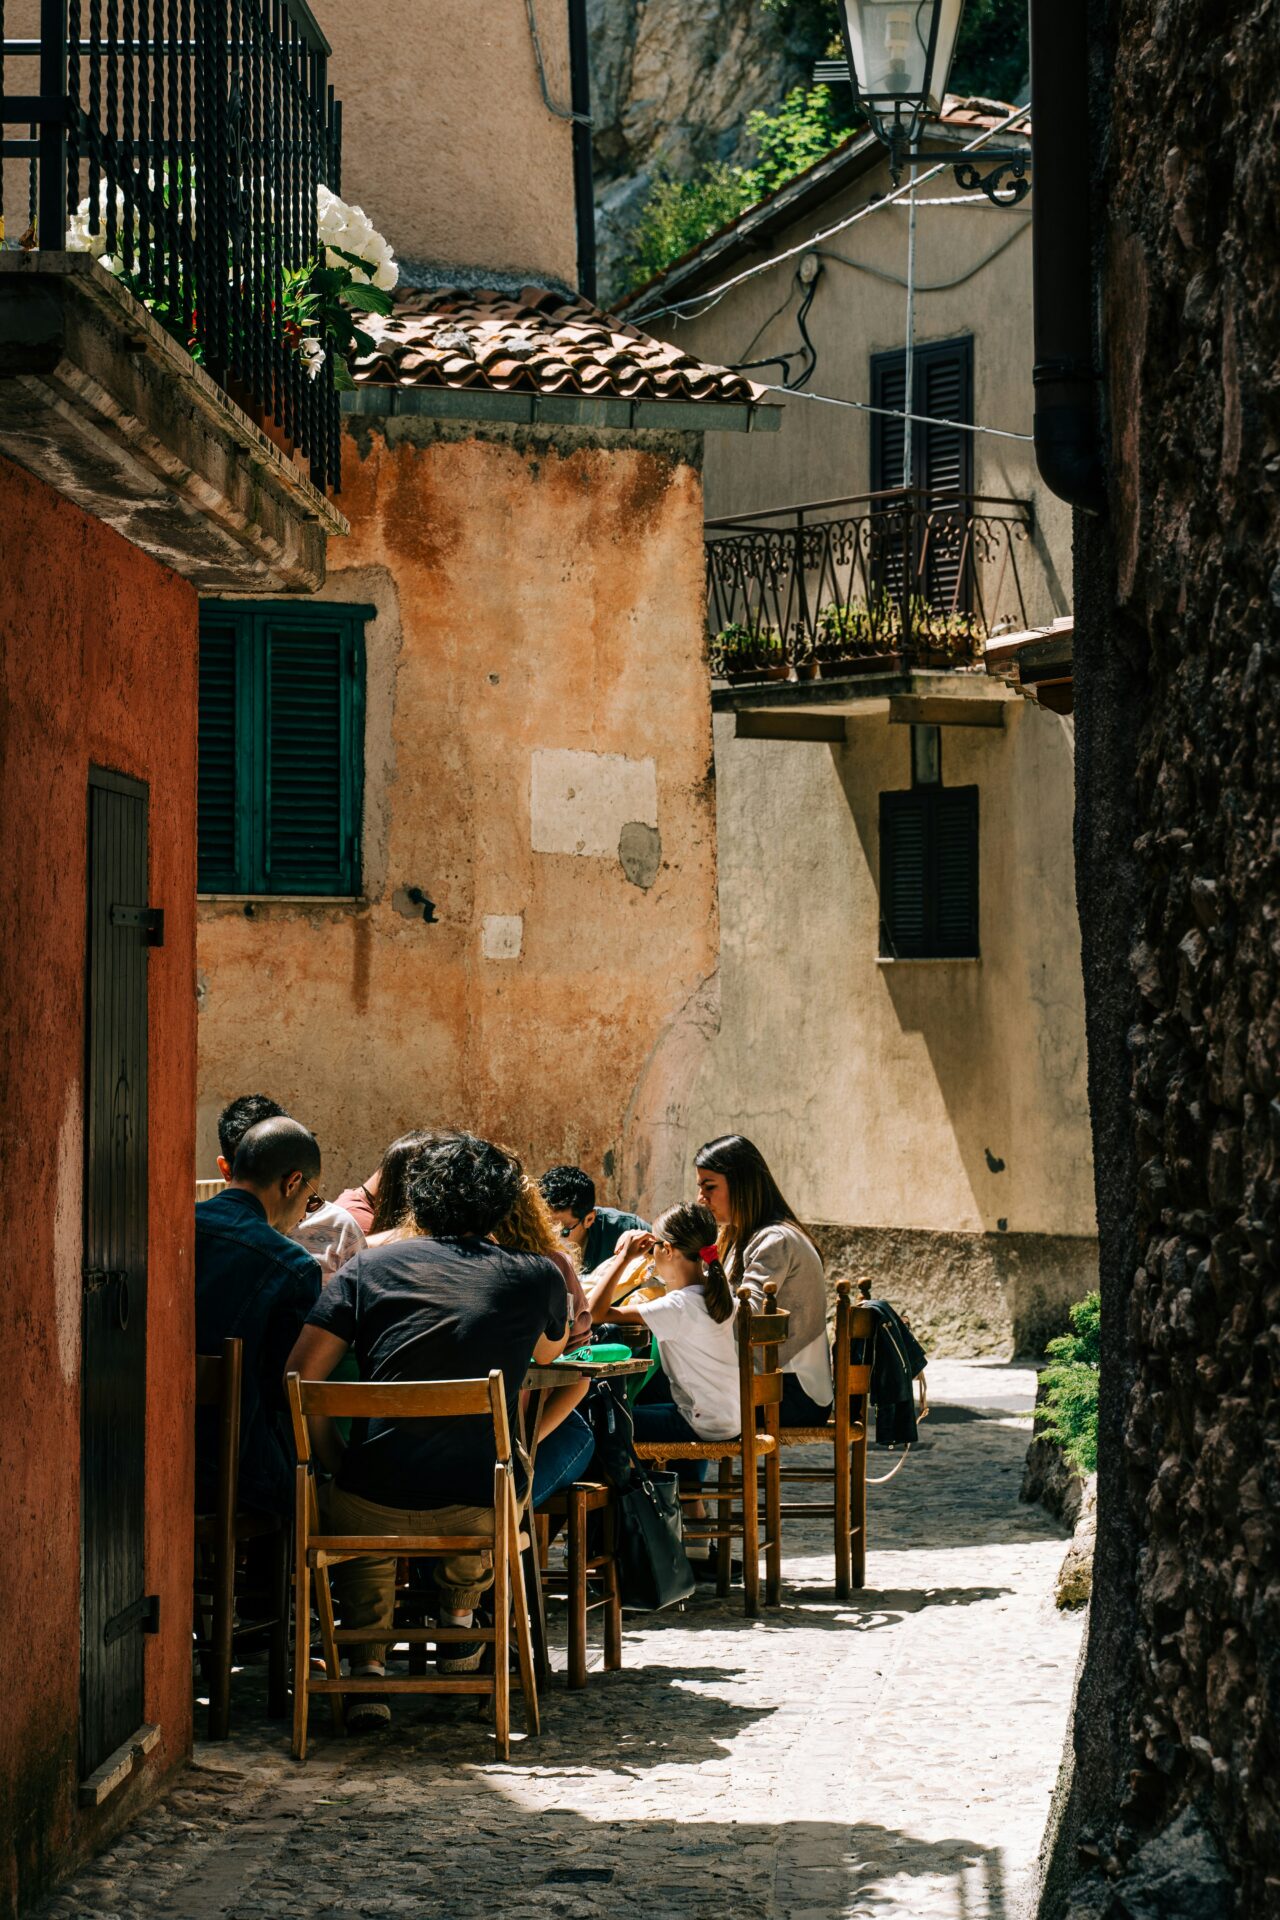 Italian family dining at a table outside their house in an old village, symbolizing cultural differences in individualism vs. collectivism